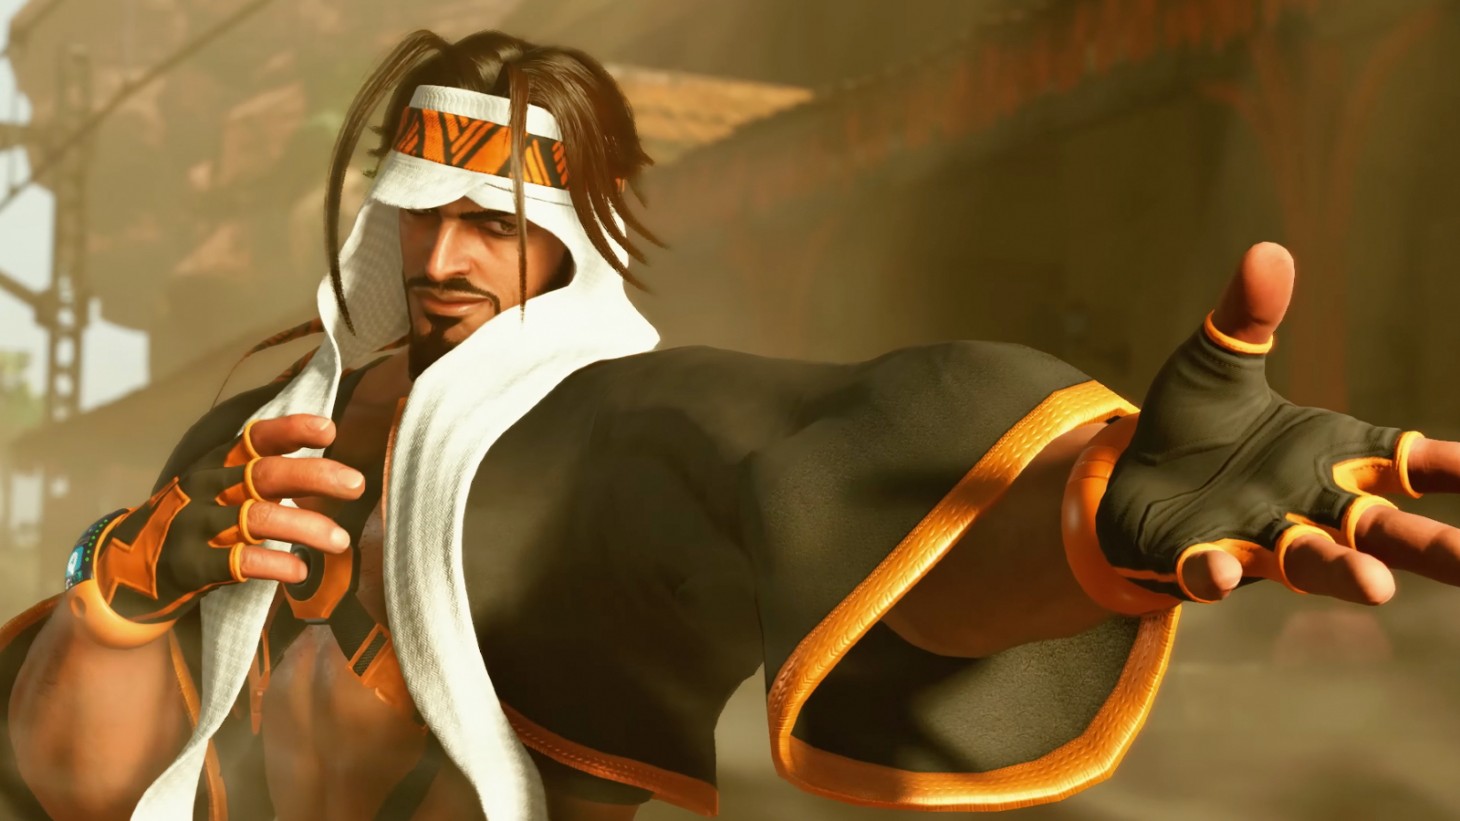 Rashid Hits The Street Fighter 6 Roster Later This Month - Game Informer